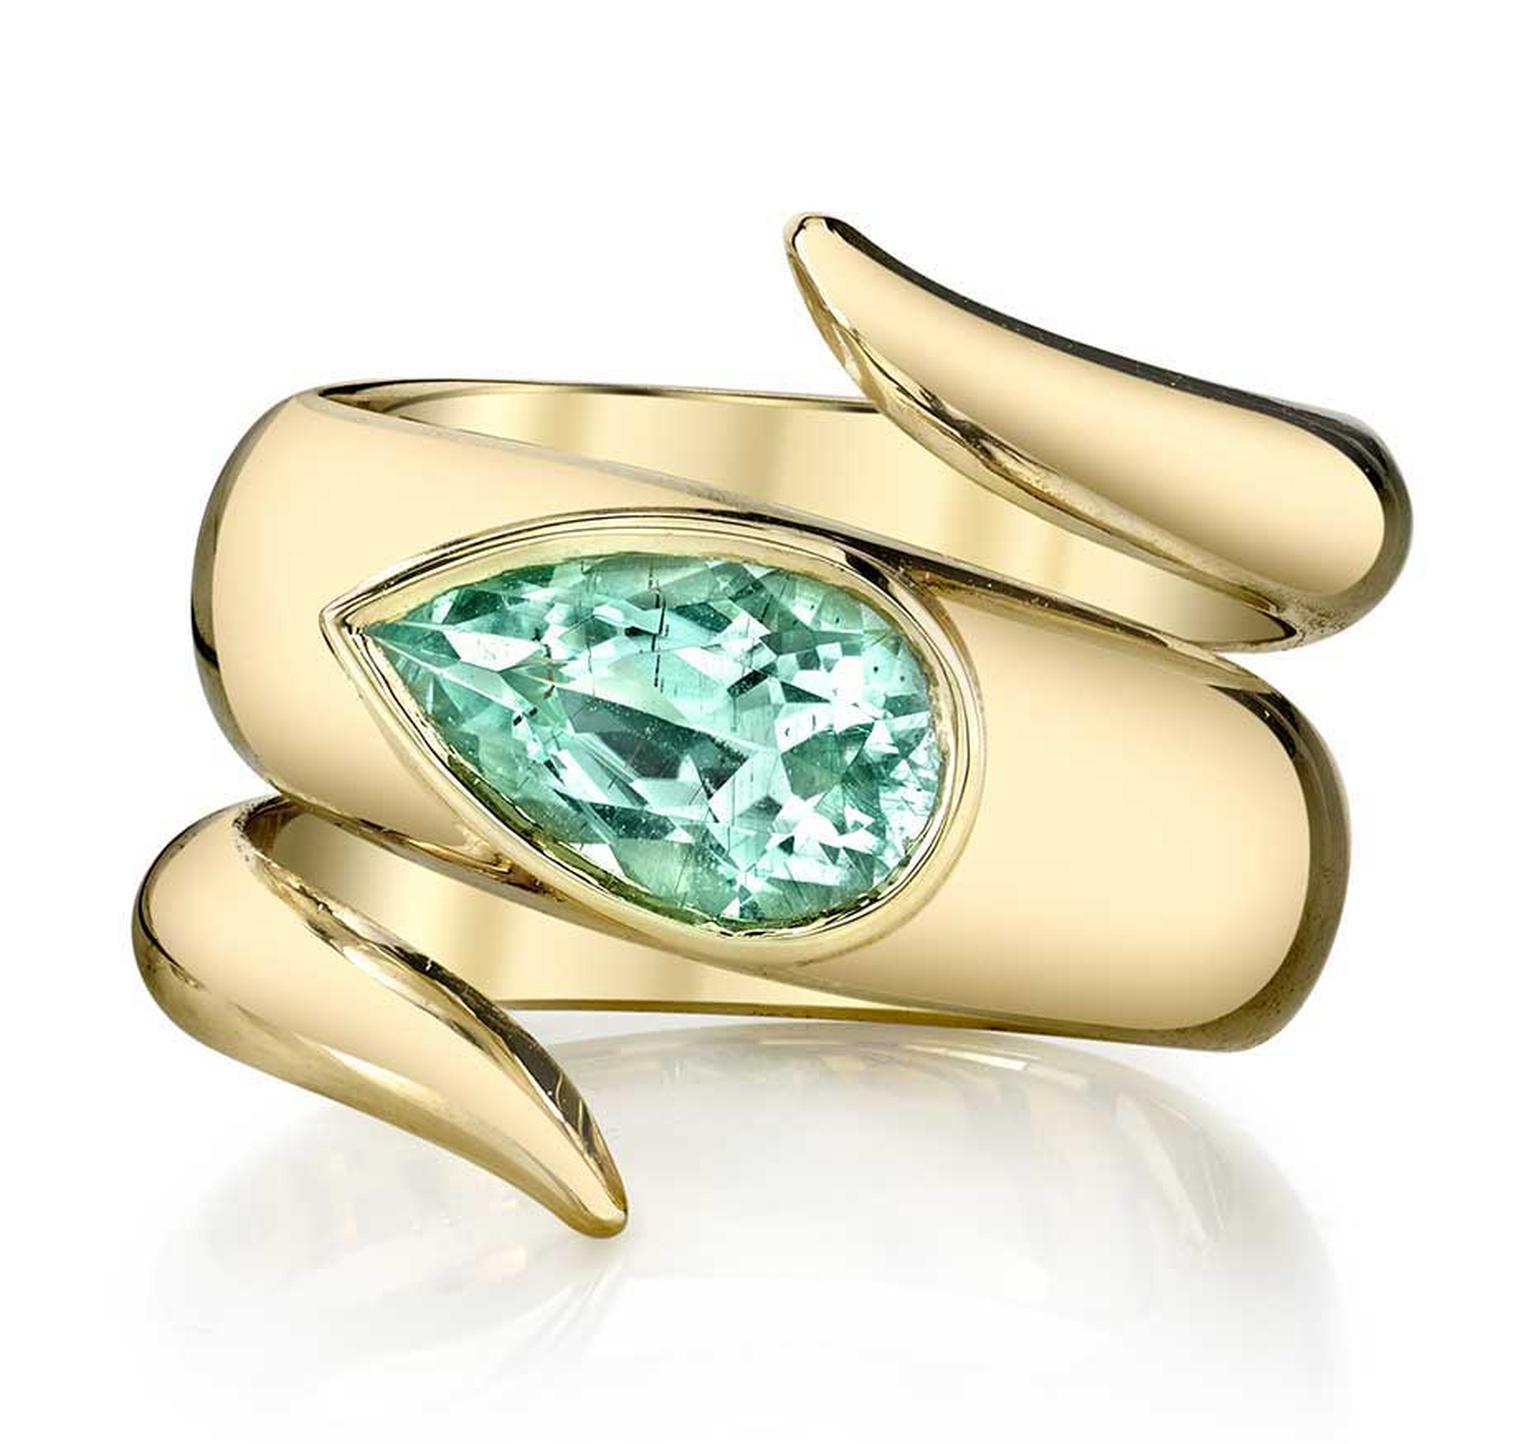 Erica Courtney green tourmaline wrap ring in gold.